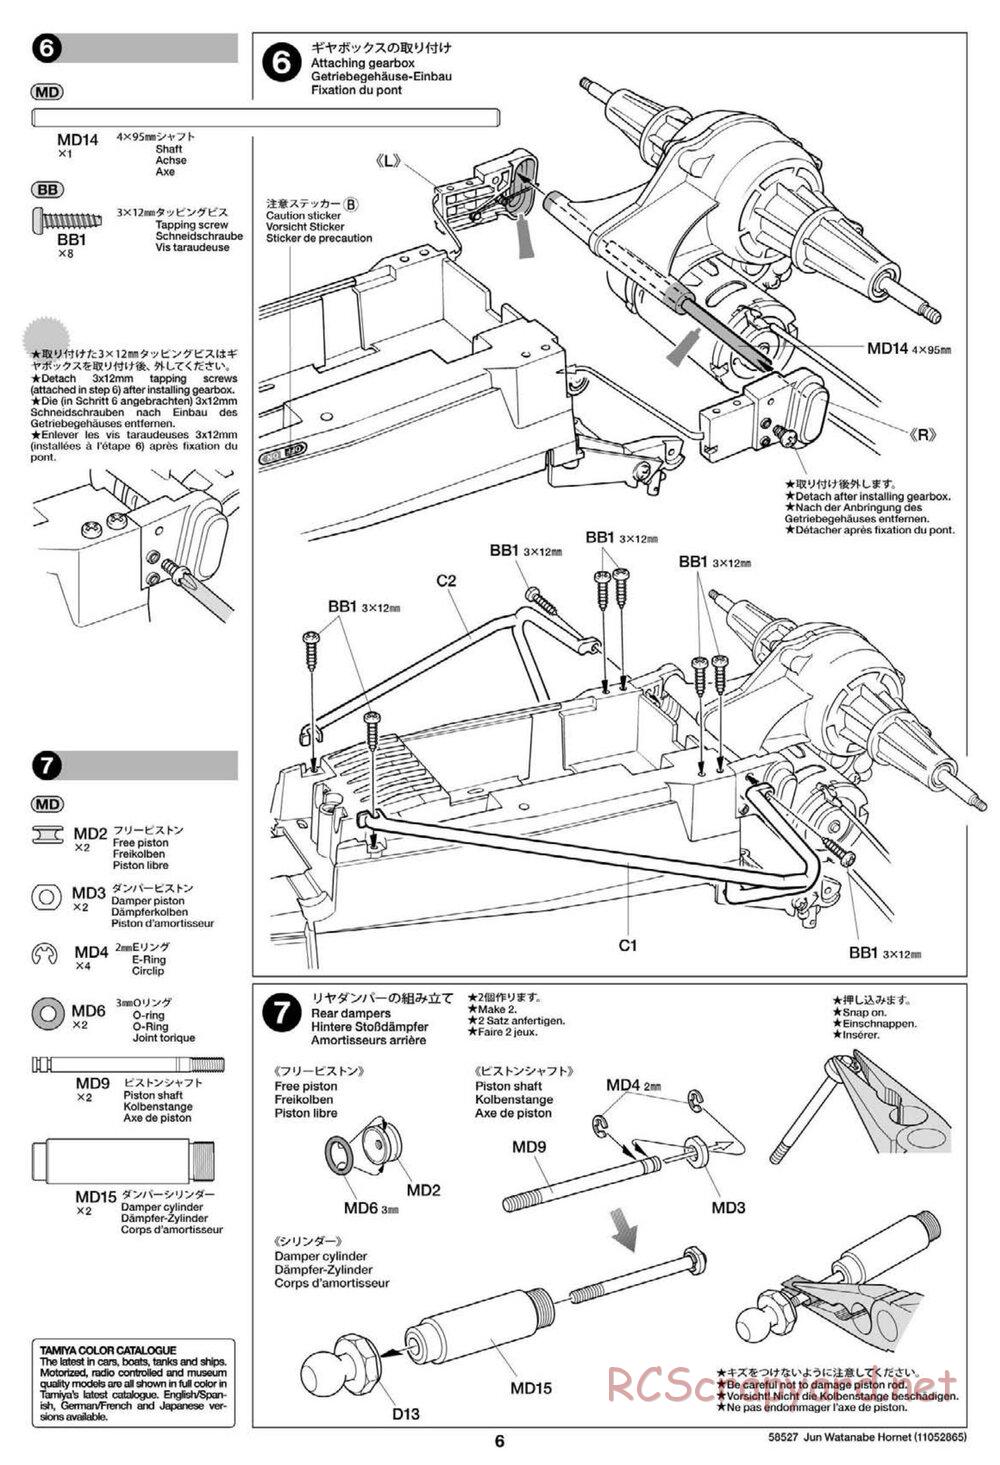 Tamiya - The Hornet by Jun Watanabe - GH Chassis - Manual - Page 6